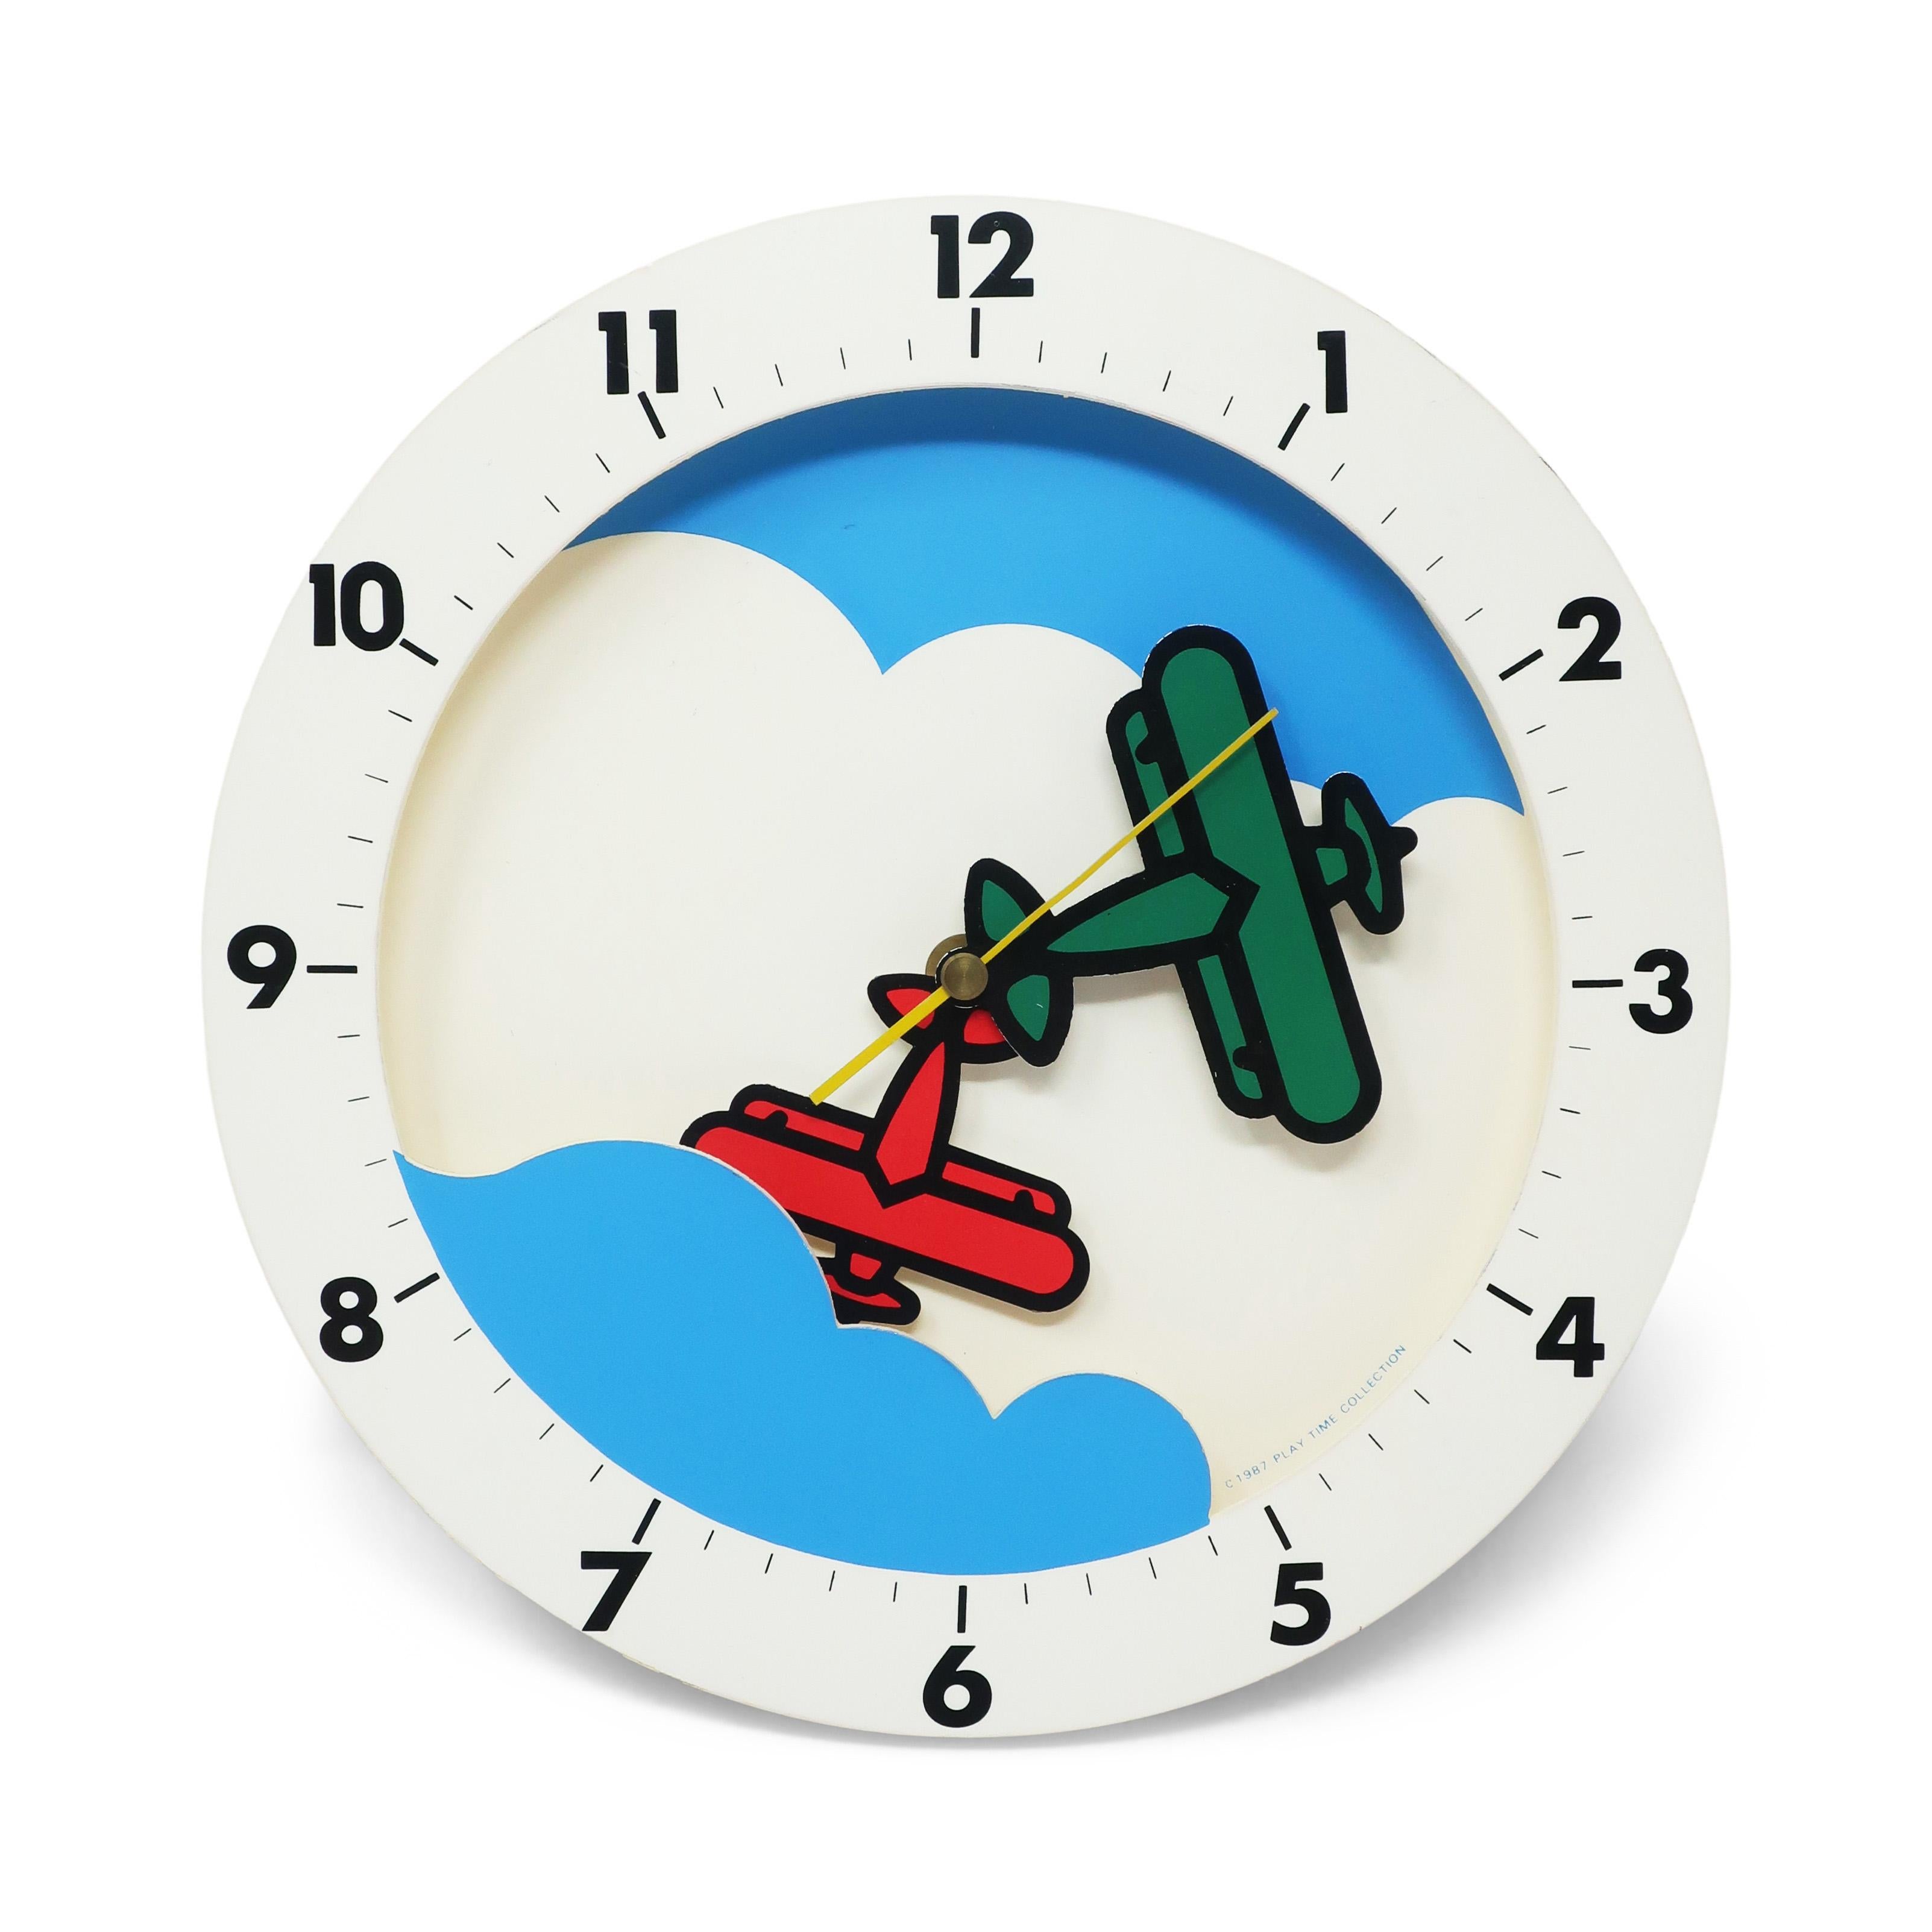 A whimsical postmodern wall clock from Play Time. A 1987 design with blue sky, fluffy white clouds, and a red and a green airplane as hands to tell them time.

In good vintage condition with wear consistent with age and use. Marked with